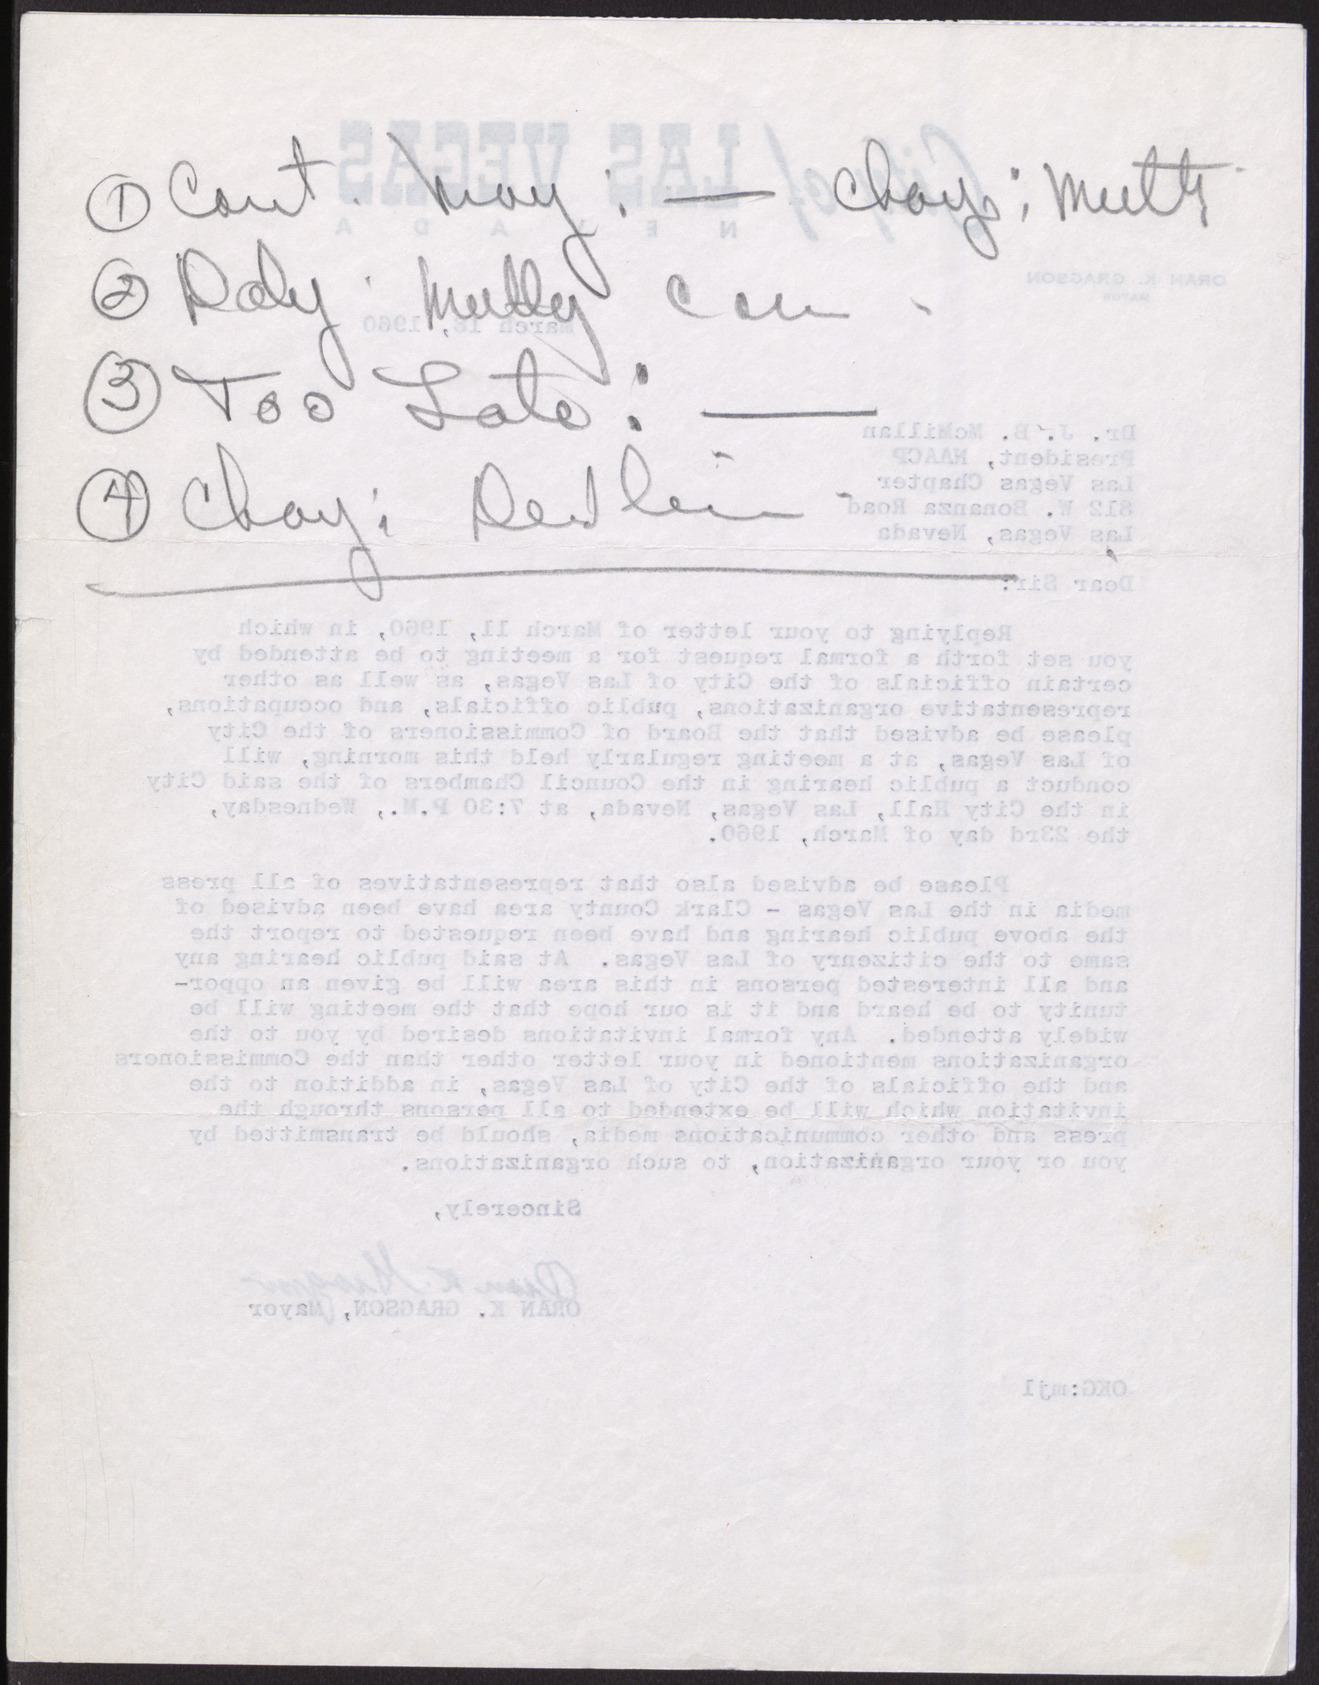 Letter to Dr. J. B. McMillan from Oran K. Gragson, March 18, 1960, page 2